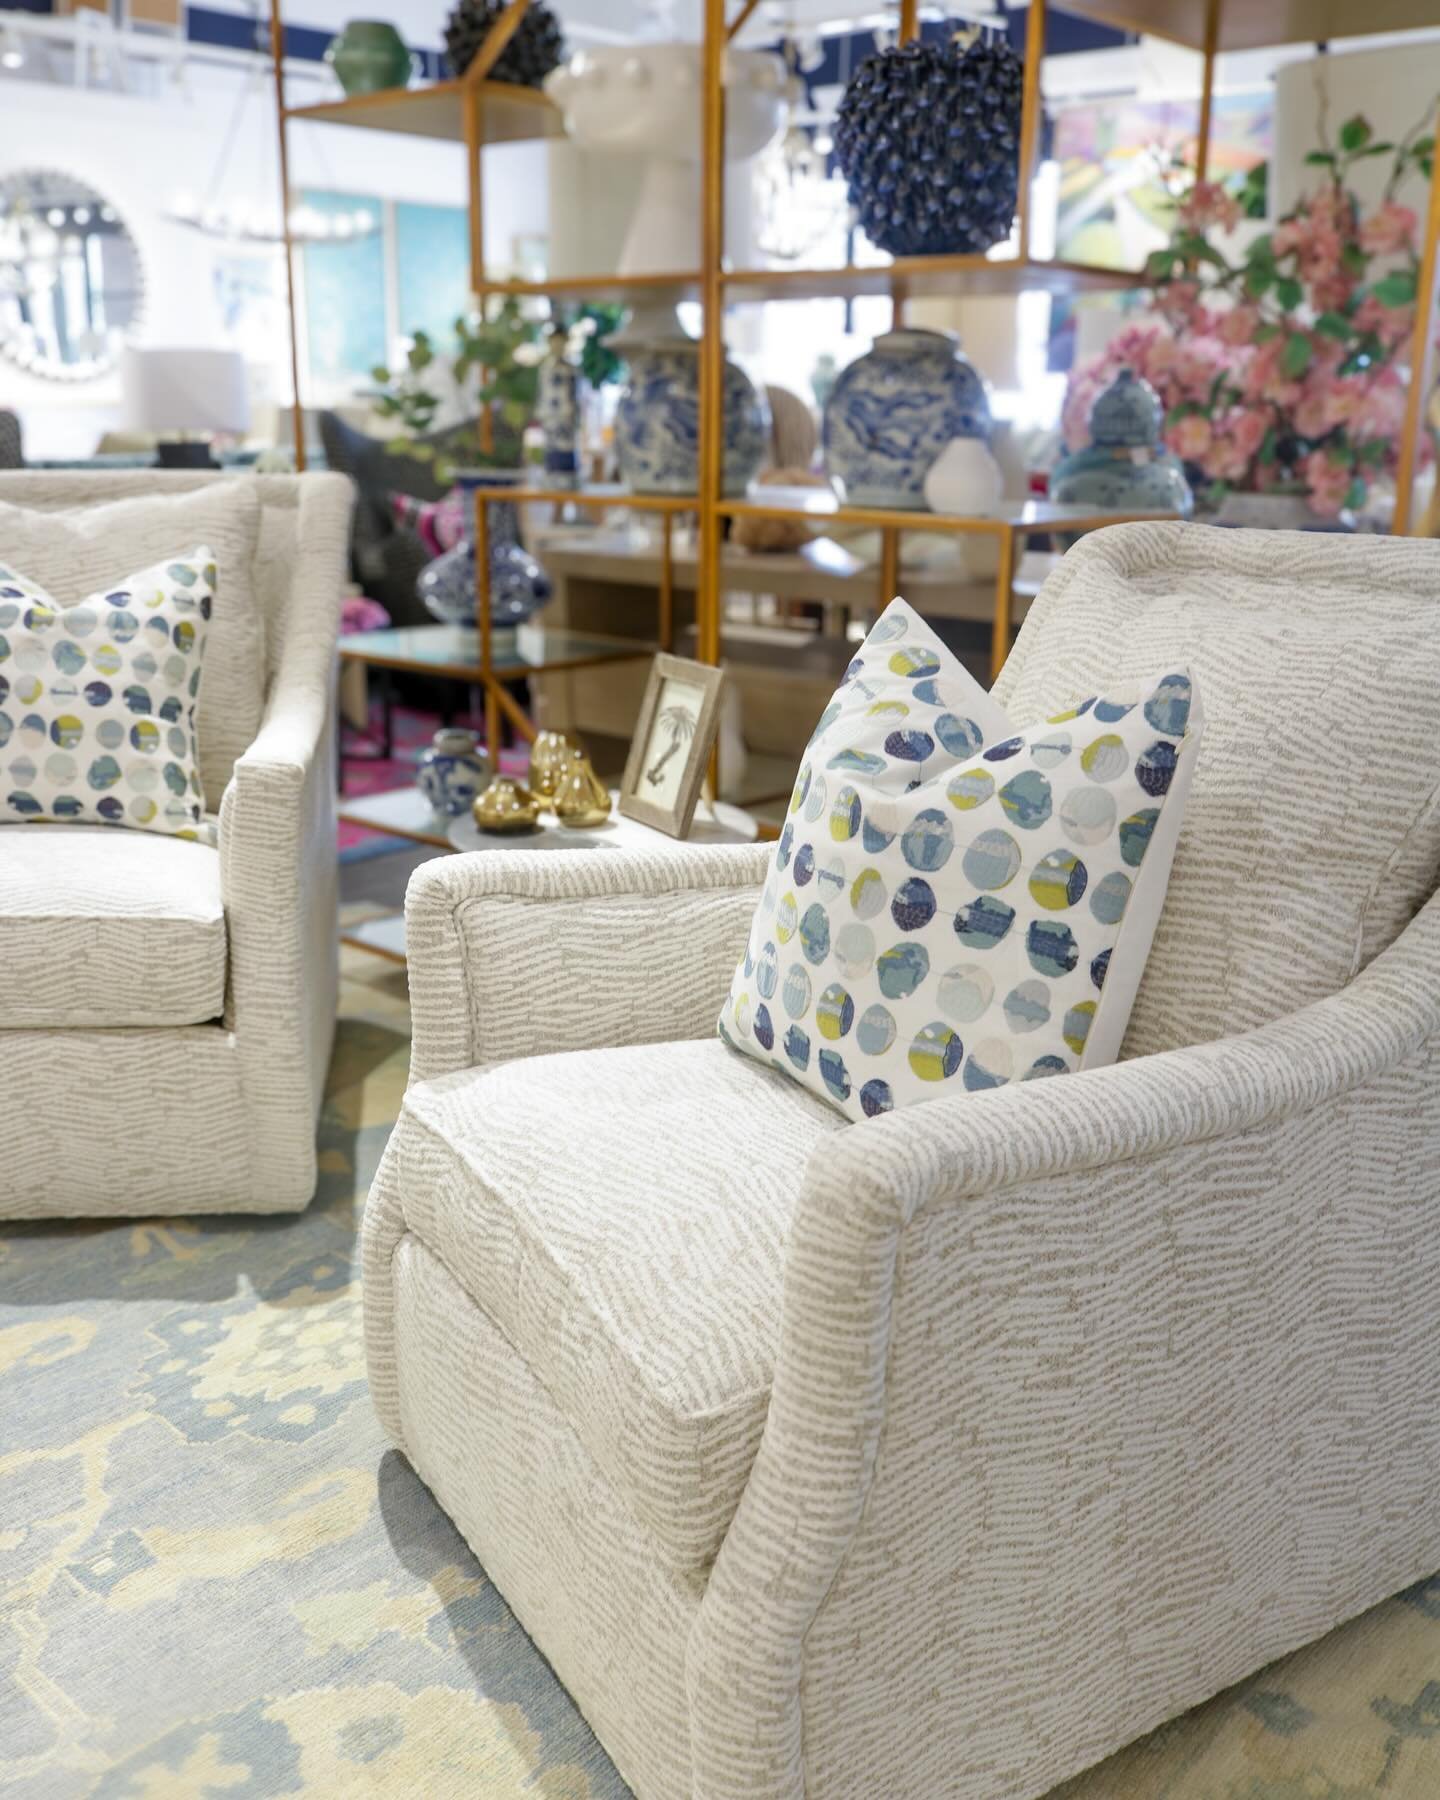 Add dimension to your space with these neutral patterned swivel chairs 🤍 Pair them with a bold printed pillow or a solid velvet and watch them shine! #NeutralFurniture #ButMakeItStylish #HenryHomeInteriors